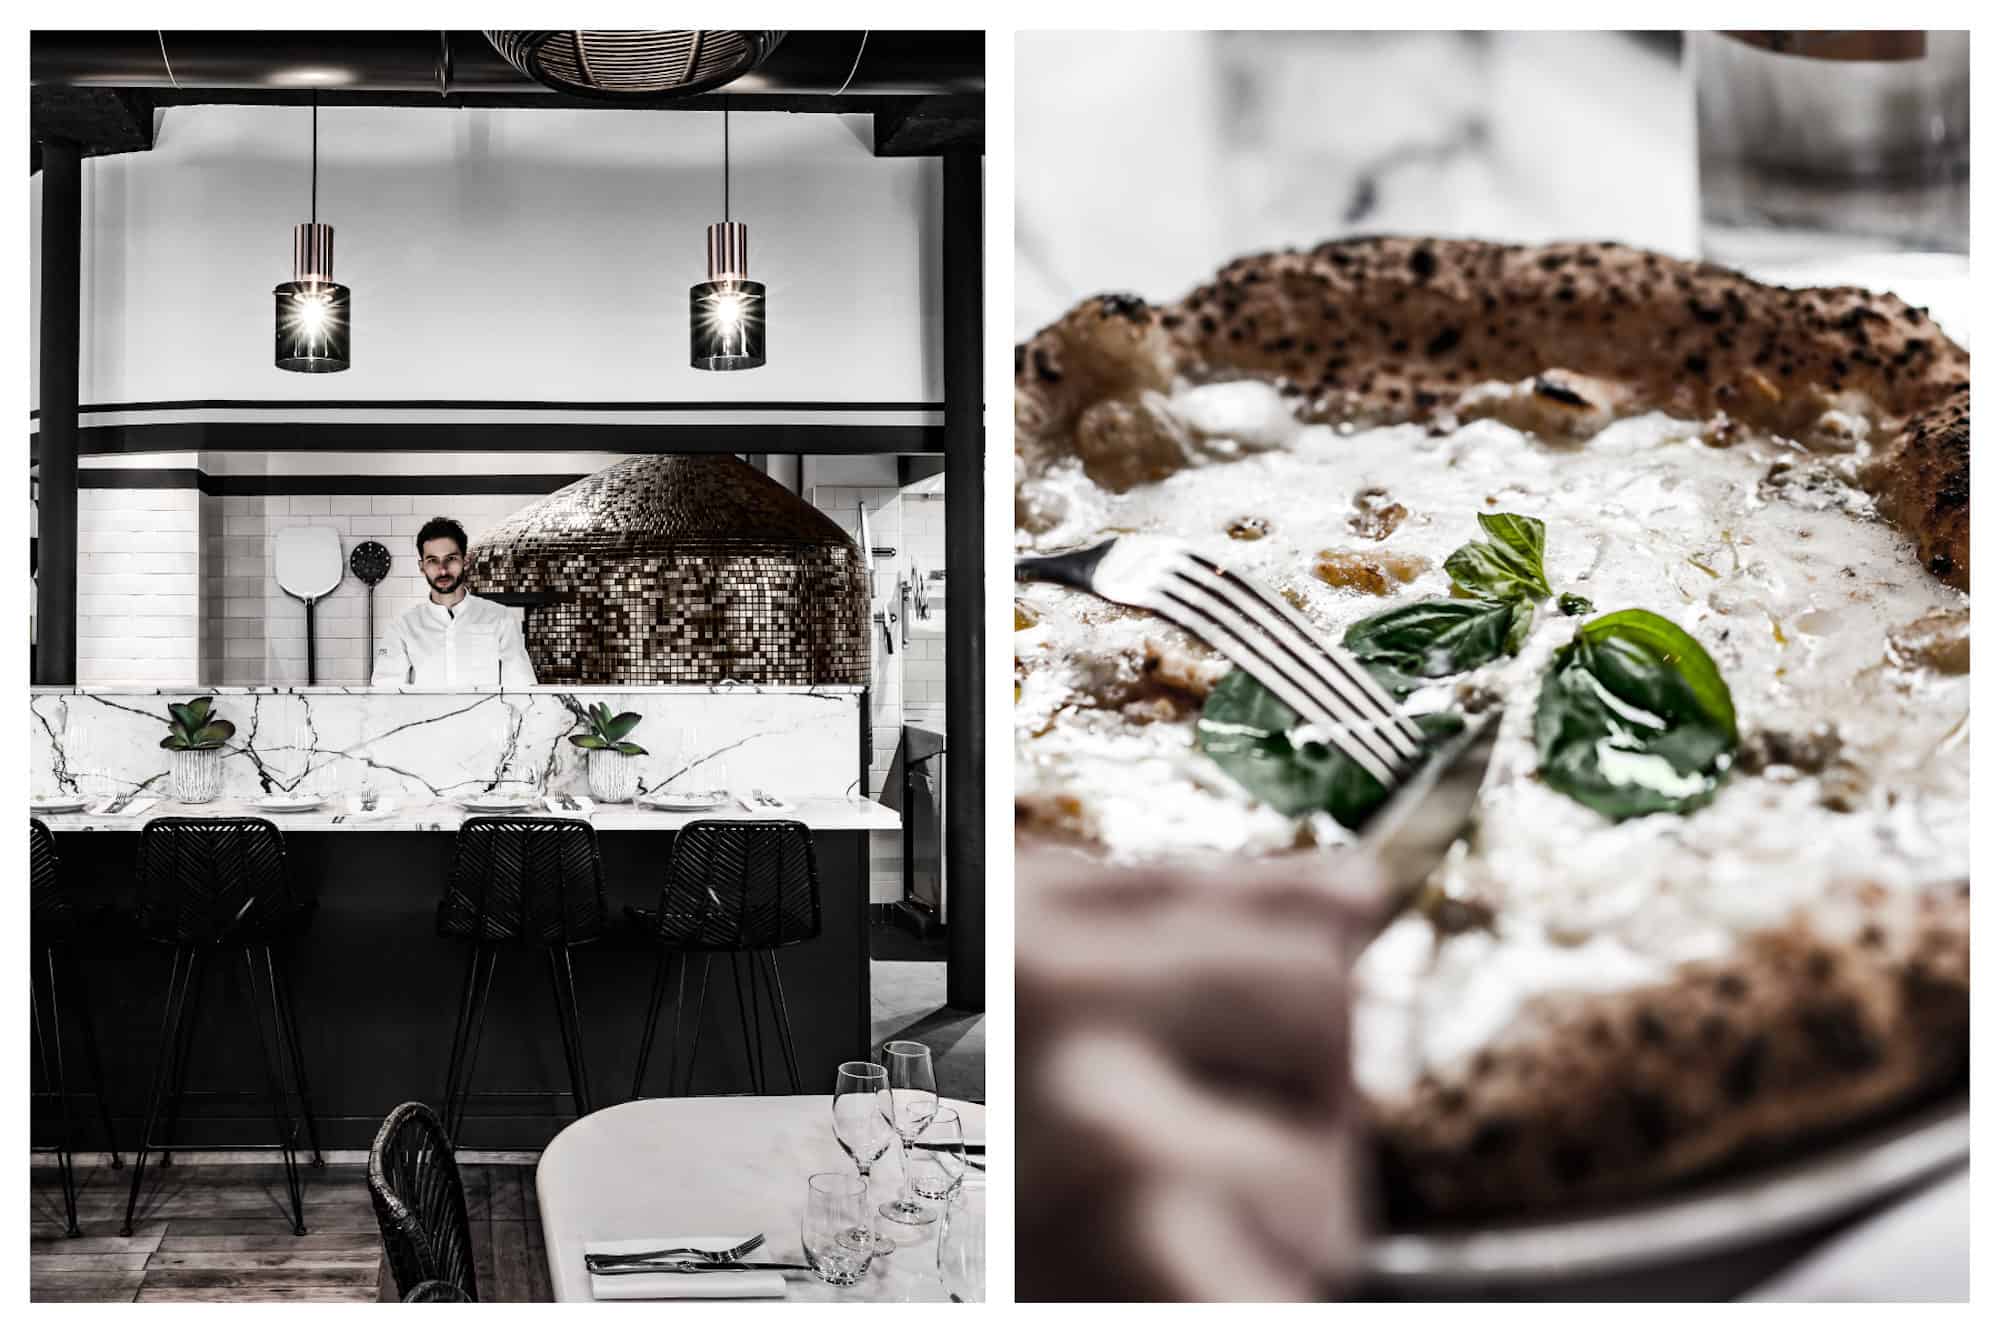 The chef with the pizza oven in the open kitchen (left) and one of the best pizzas in Paris (right) at Italian restaurant Anima on rue du Cherche-Midi.